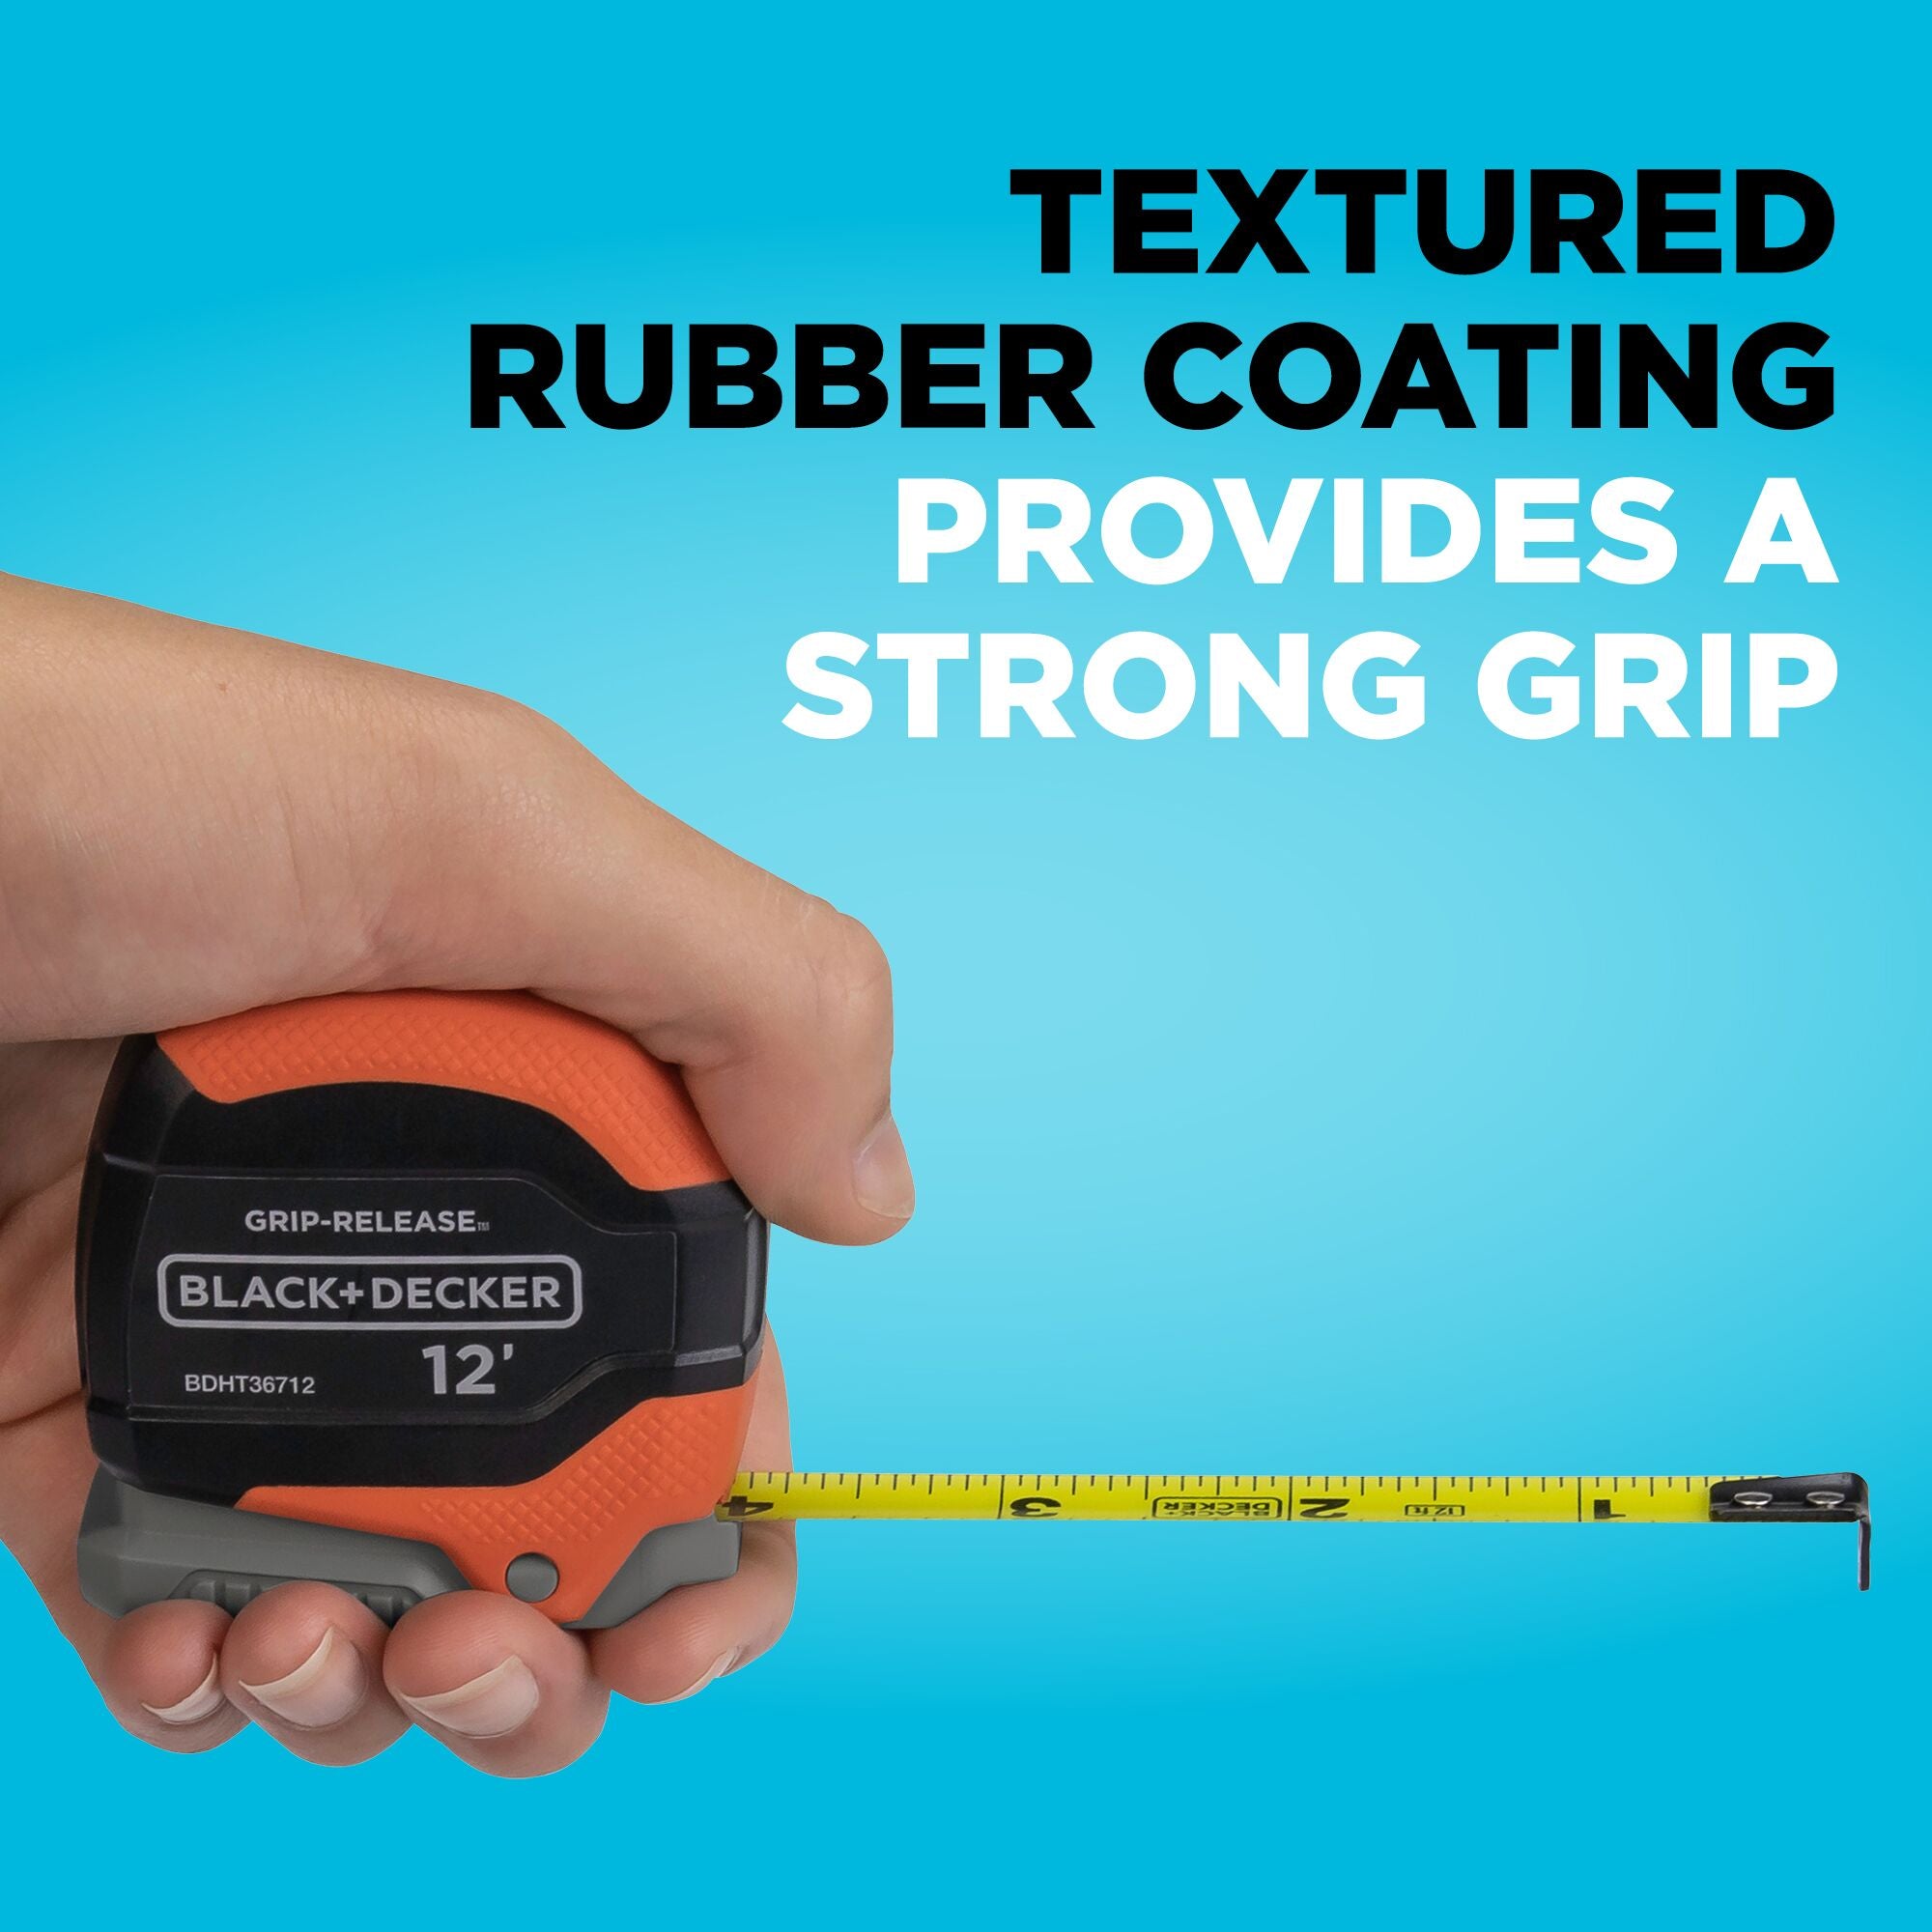 BLACK+DECKER 12 ft. and 16 ft. Tape Measure textured rubber coating provides a strong grip